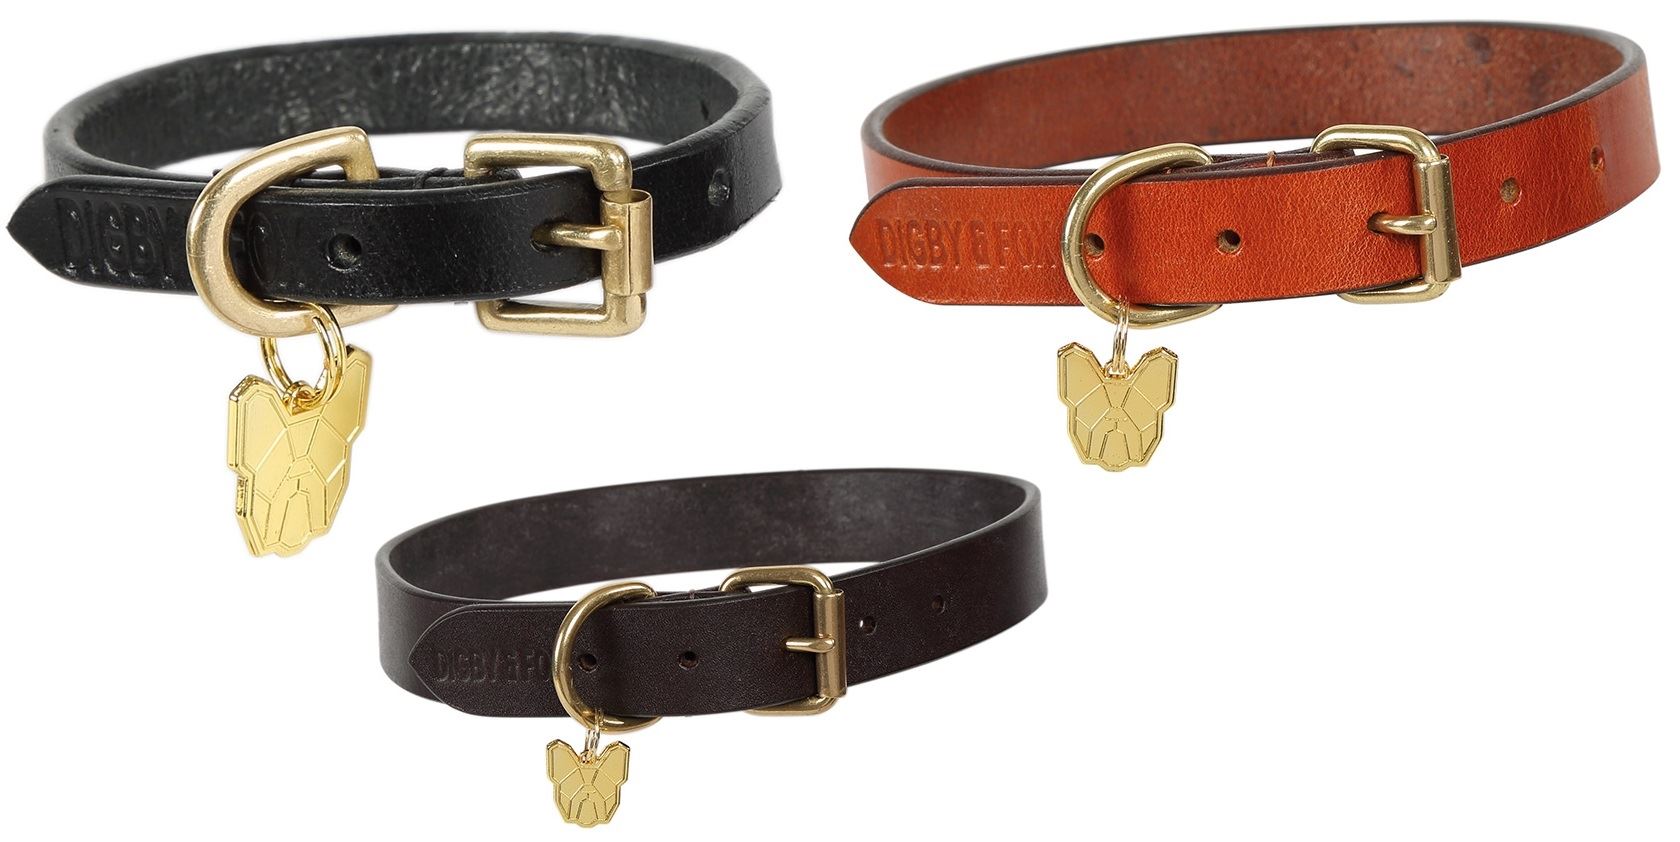 Shires Digby & Fox Flat Leather Dog Collar - Just Horse Riders